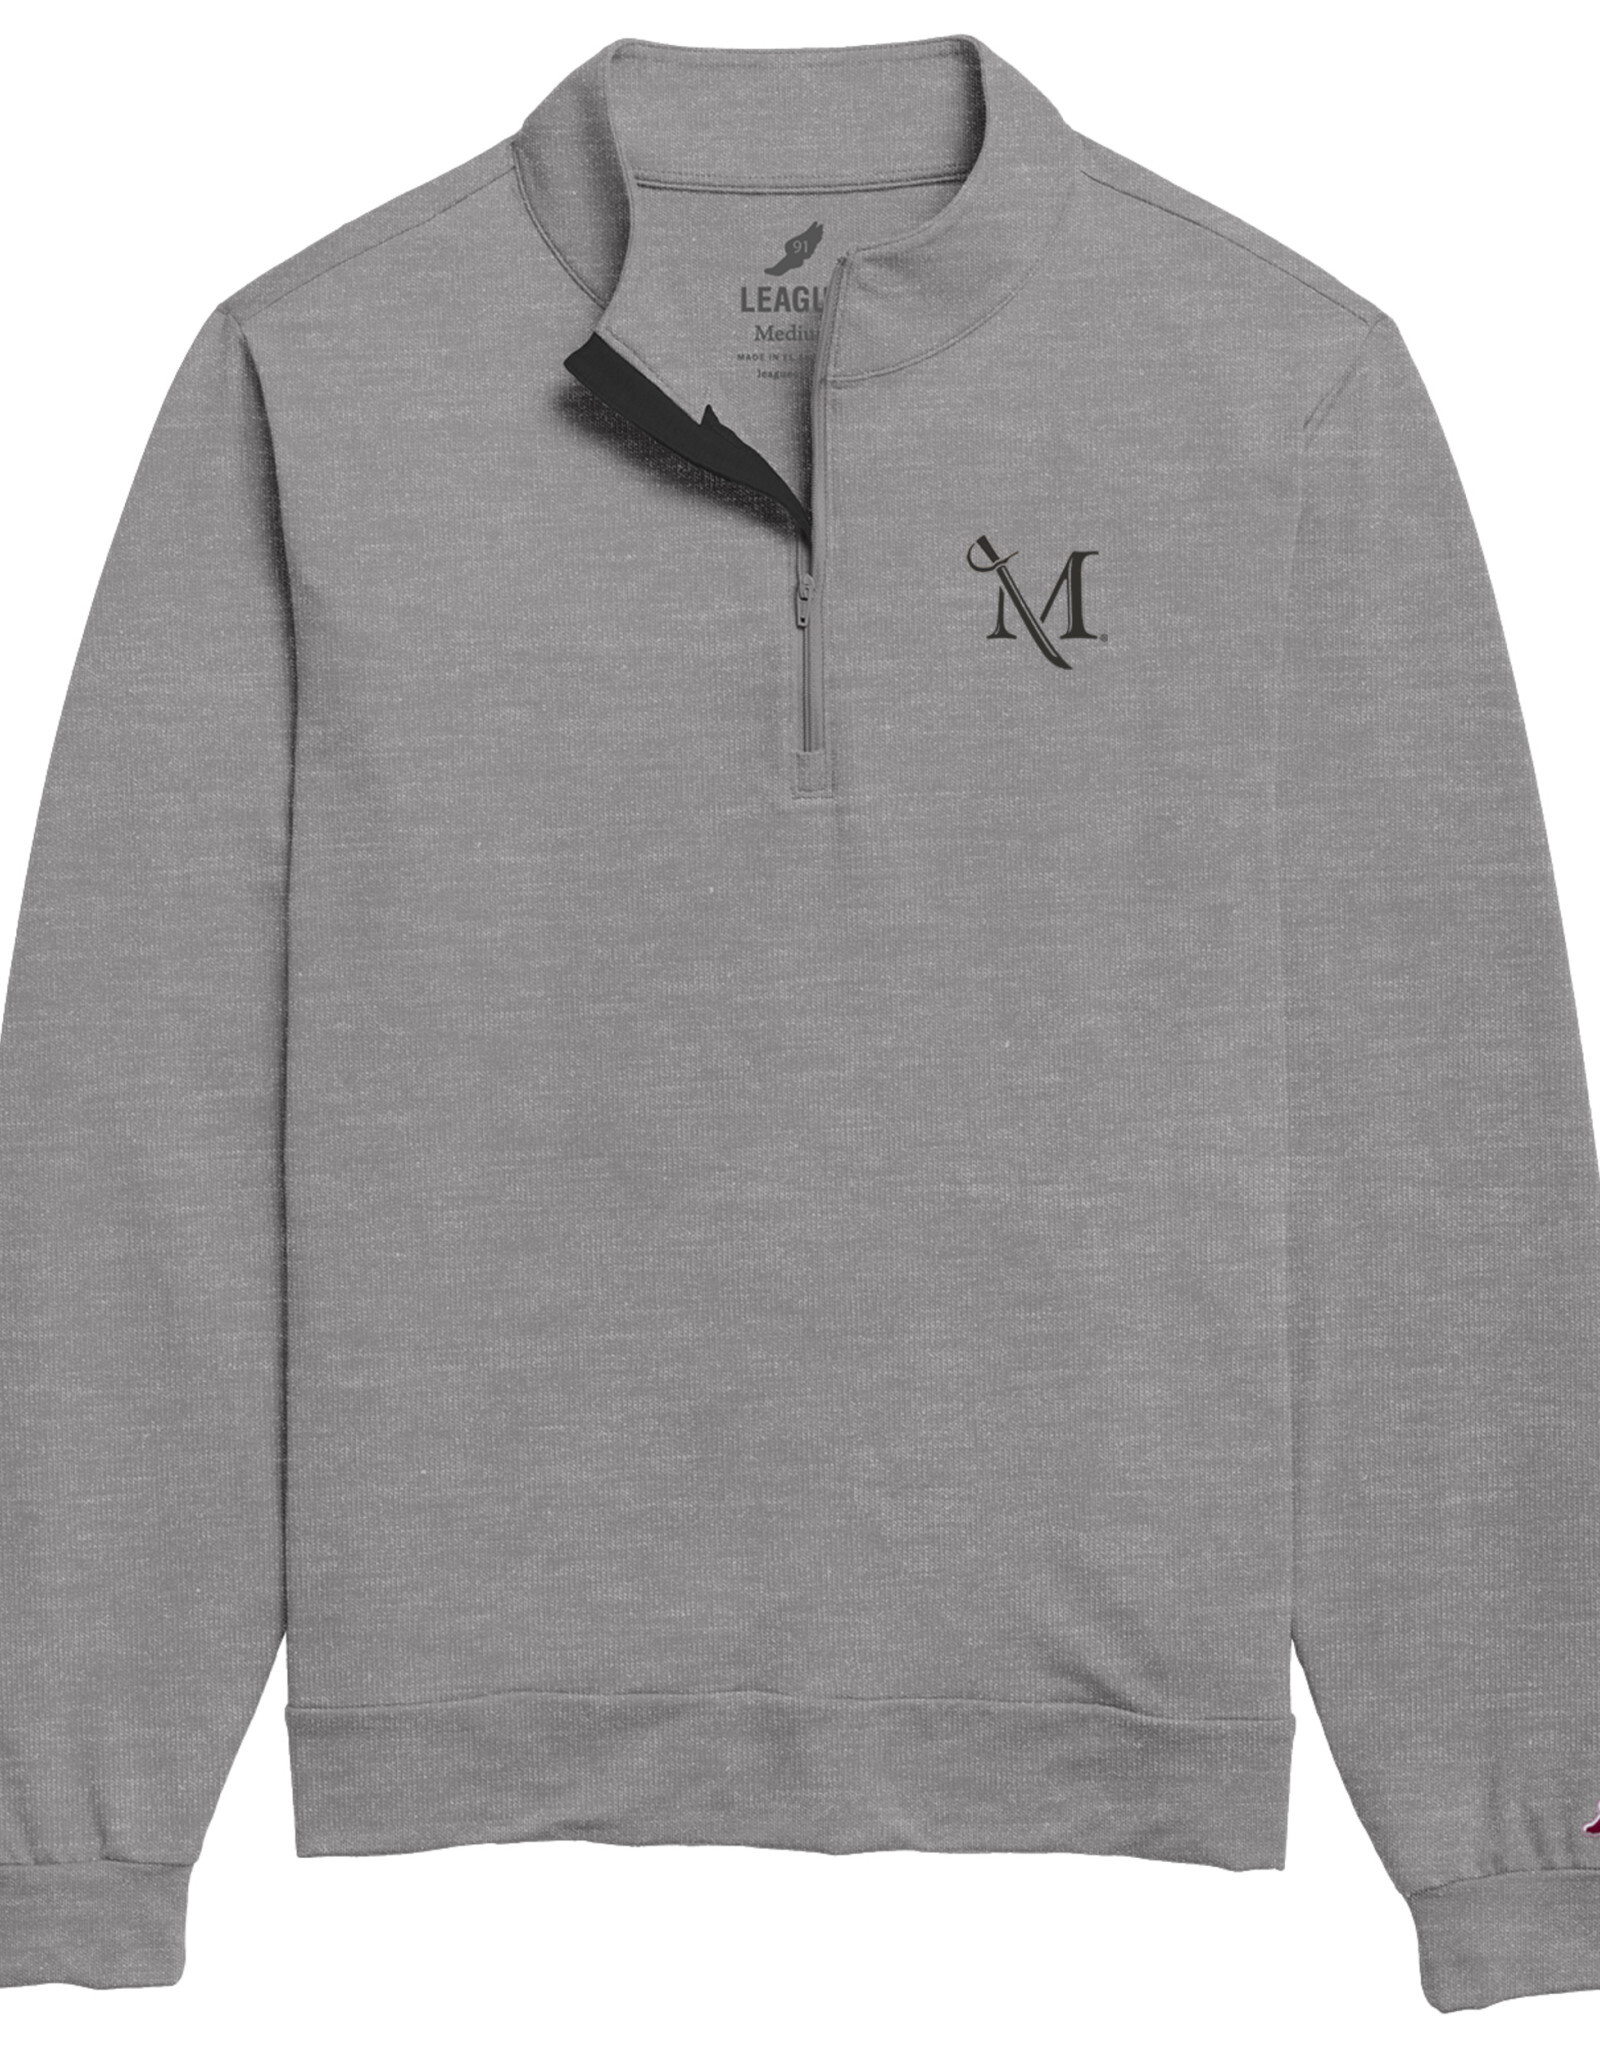 League All Day 1/4 Zip - Frost Grey